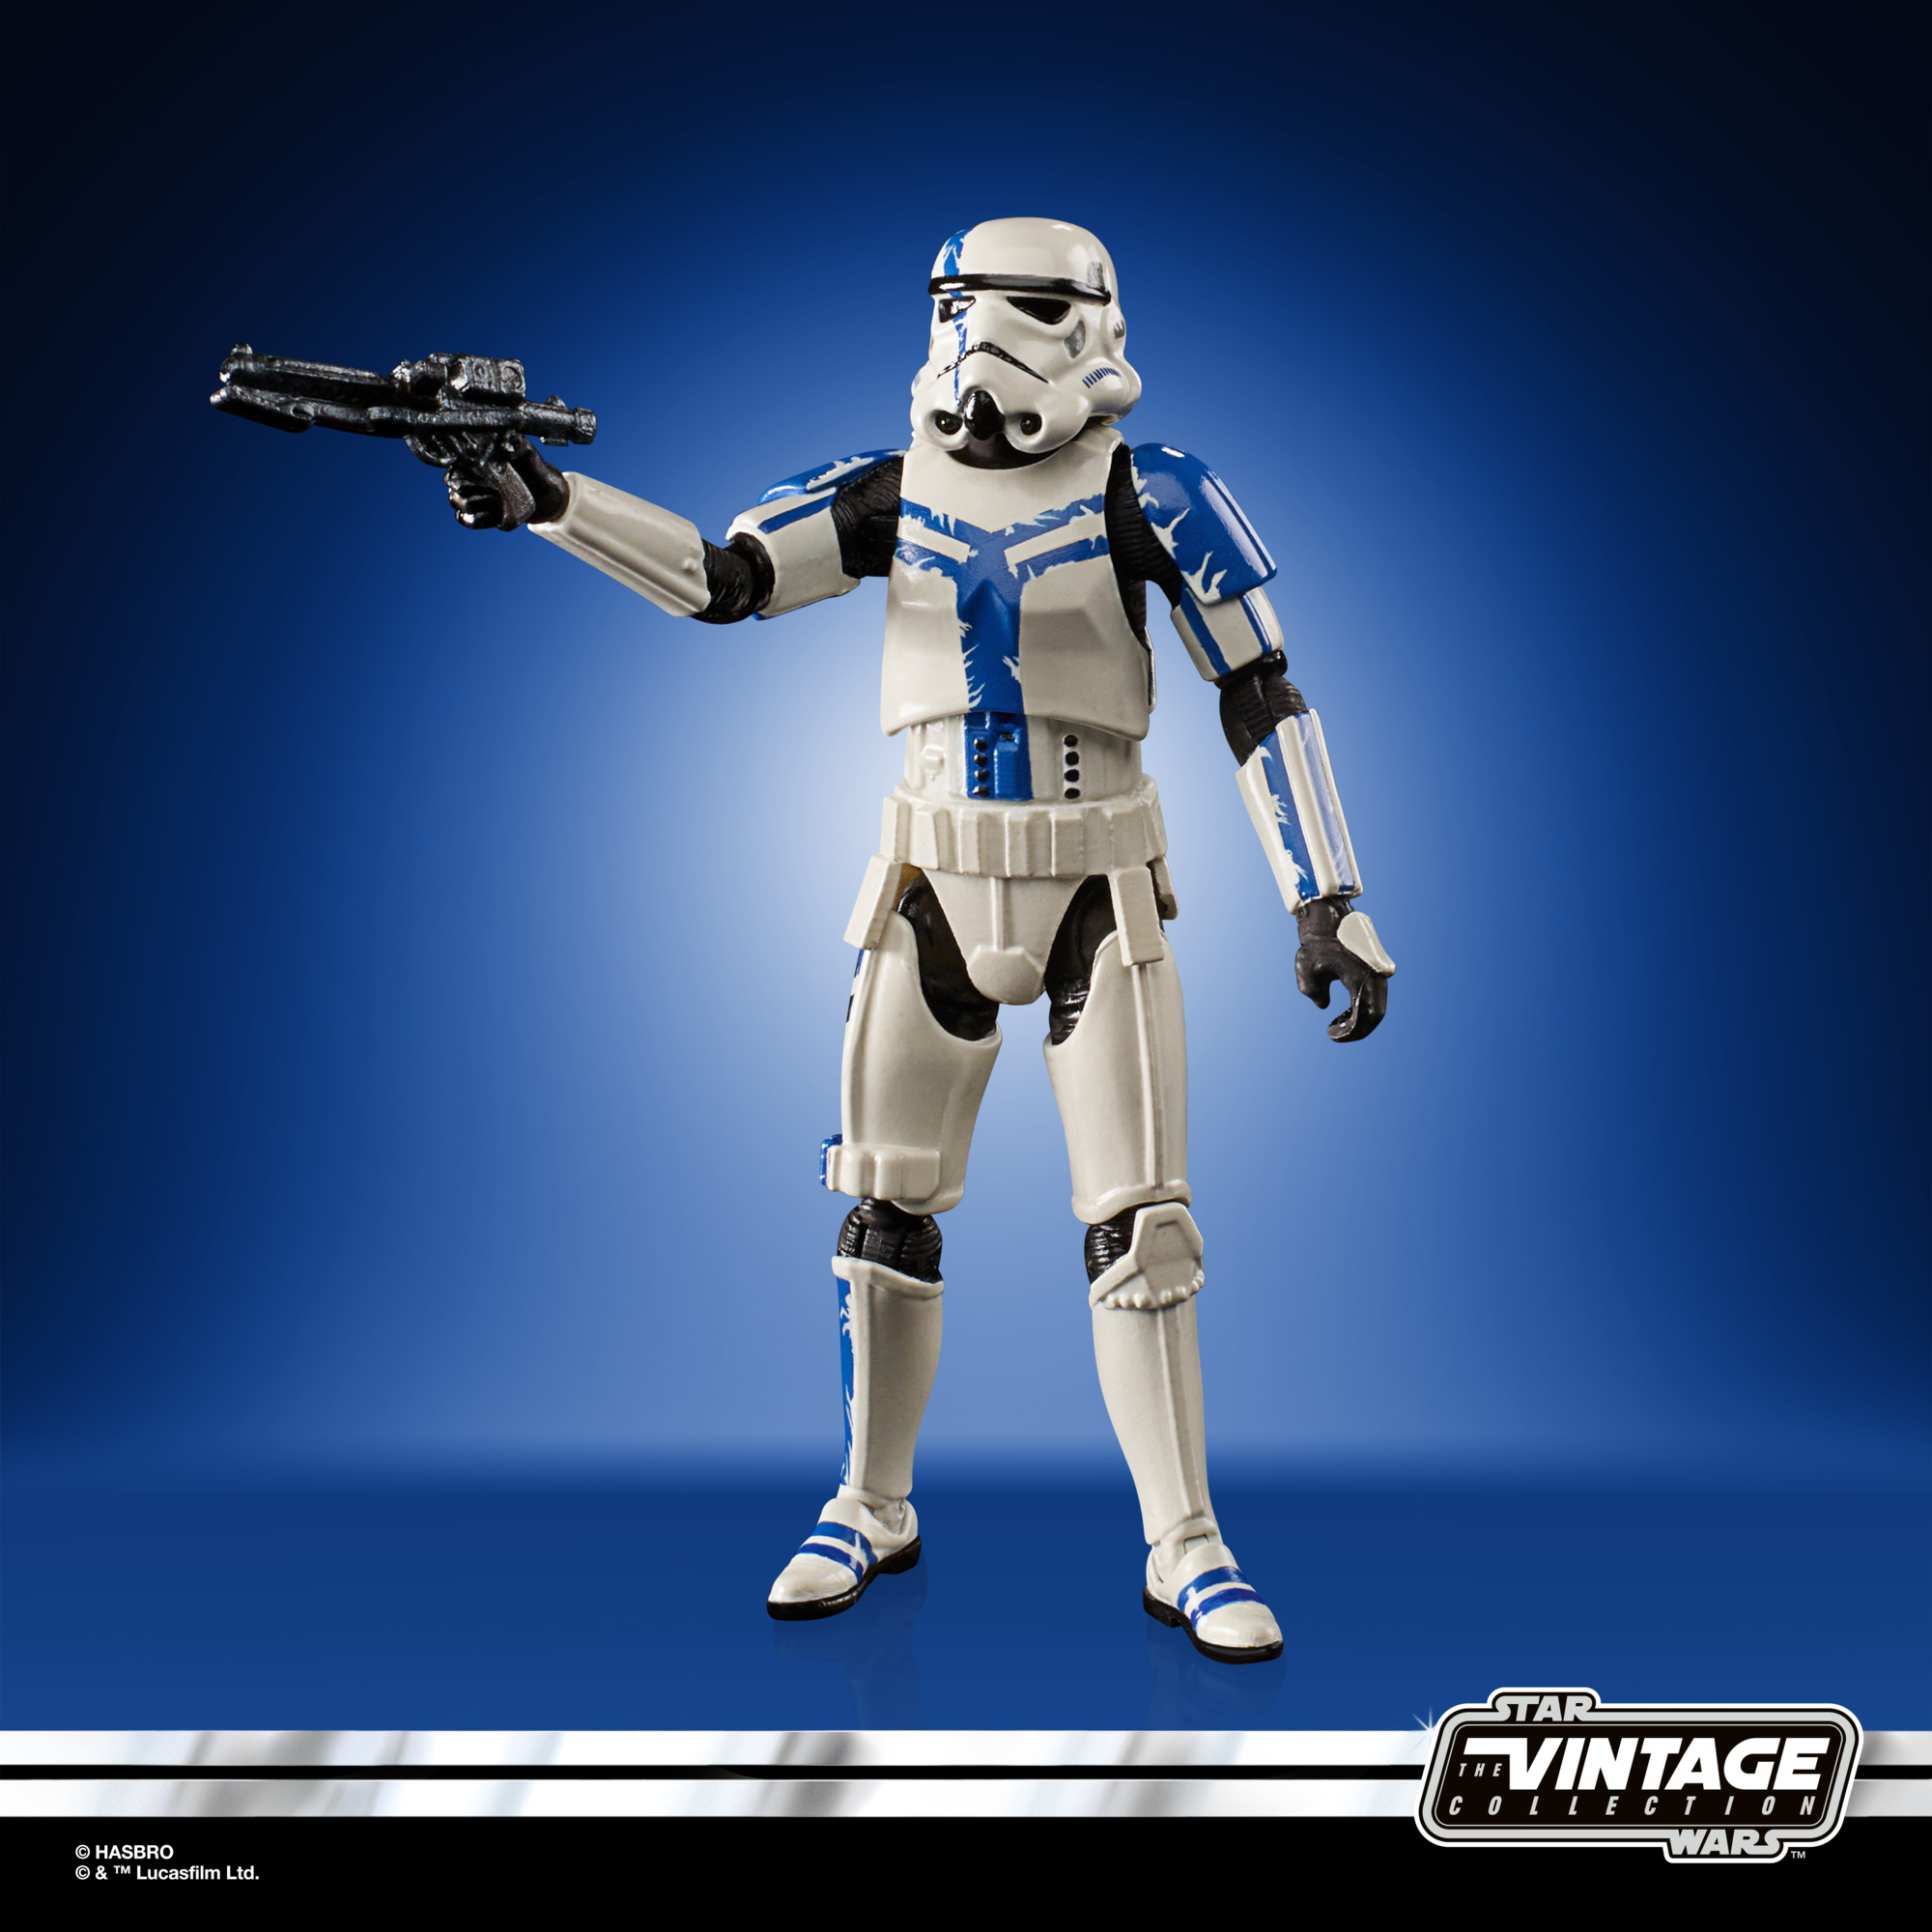 Star Wars The Vintage Collection Gaming Greats Stormtrooper Commander F55595L00 5010993967858